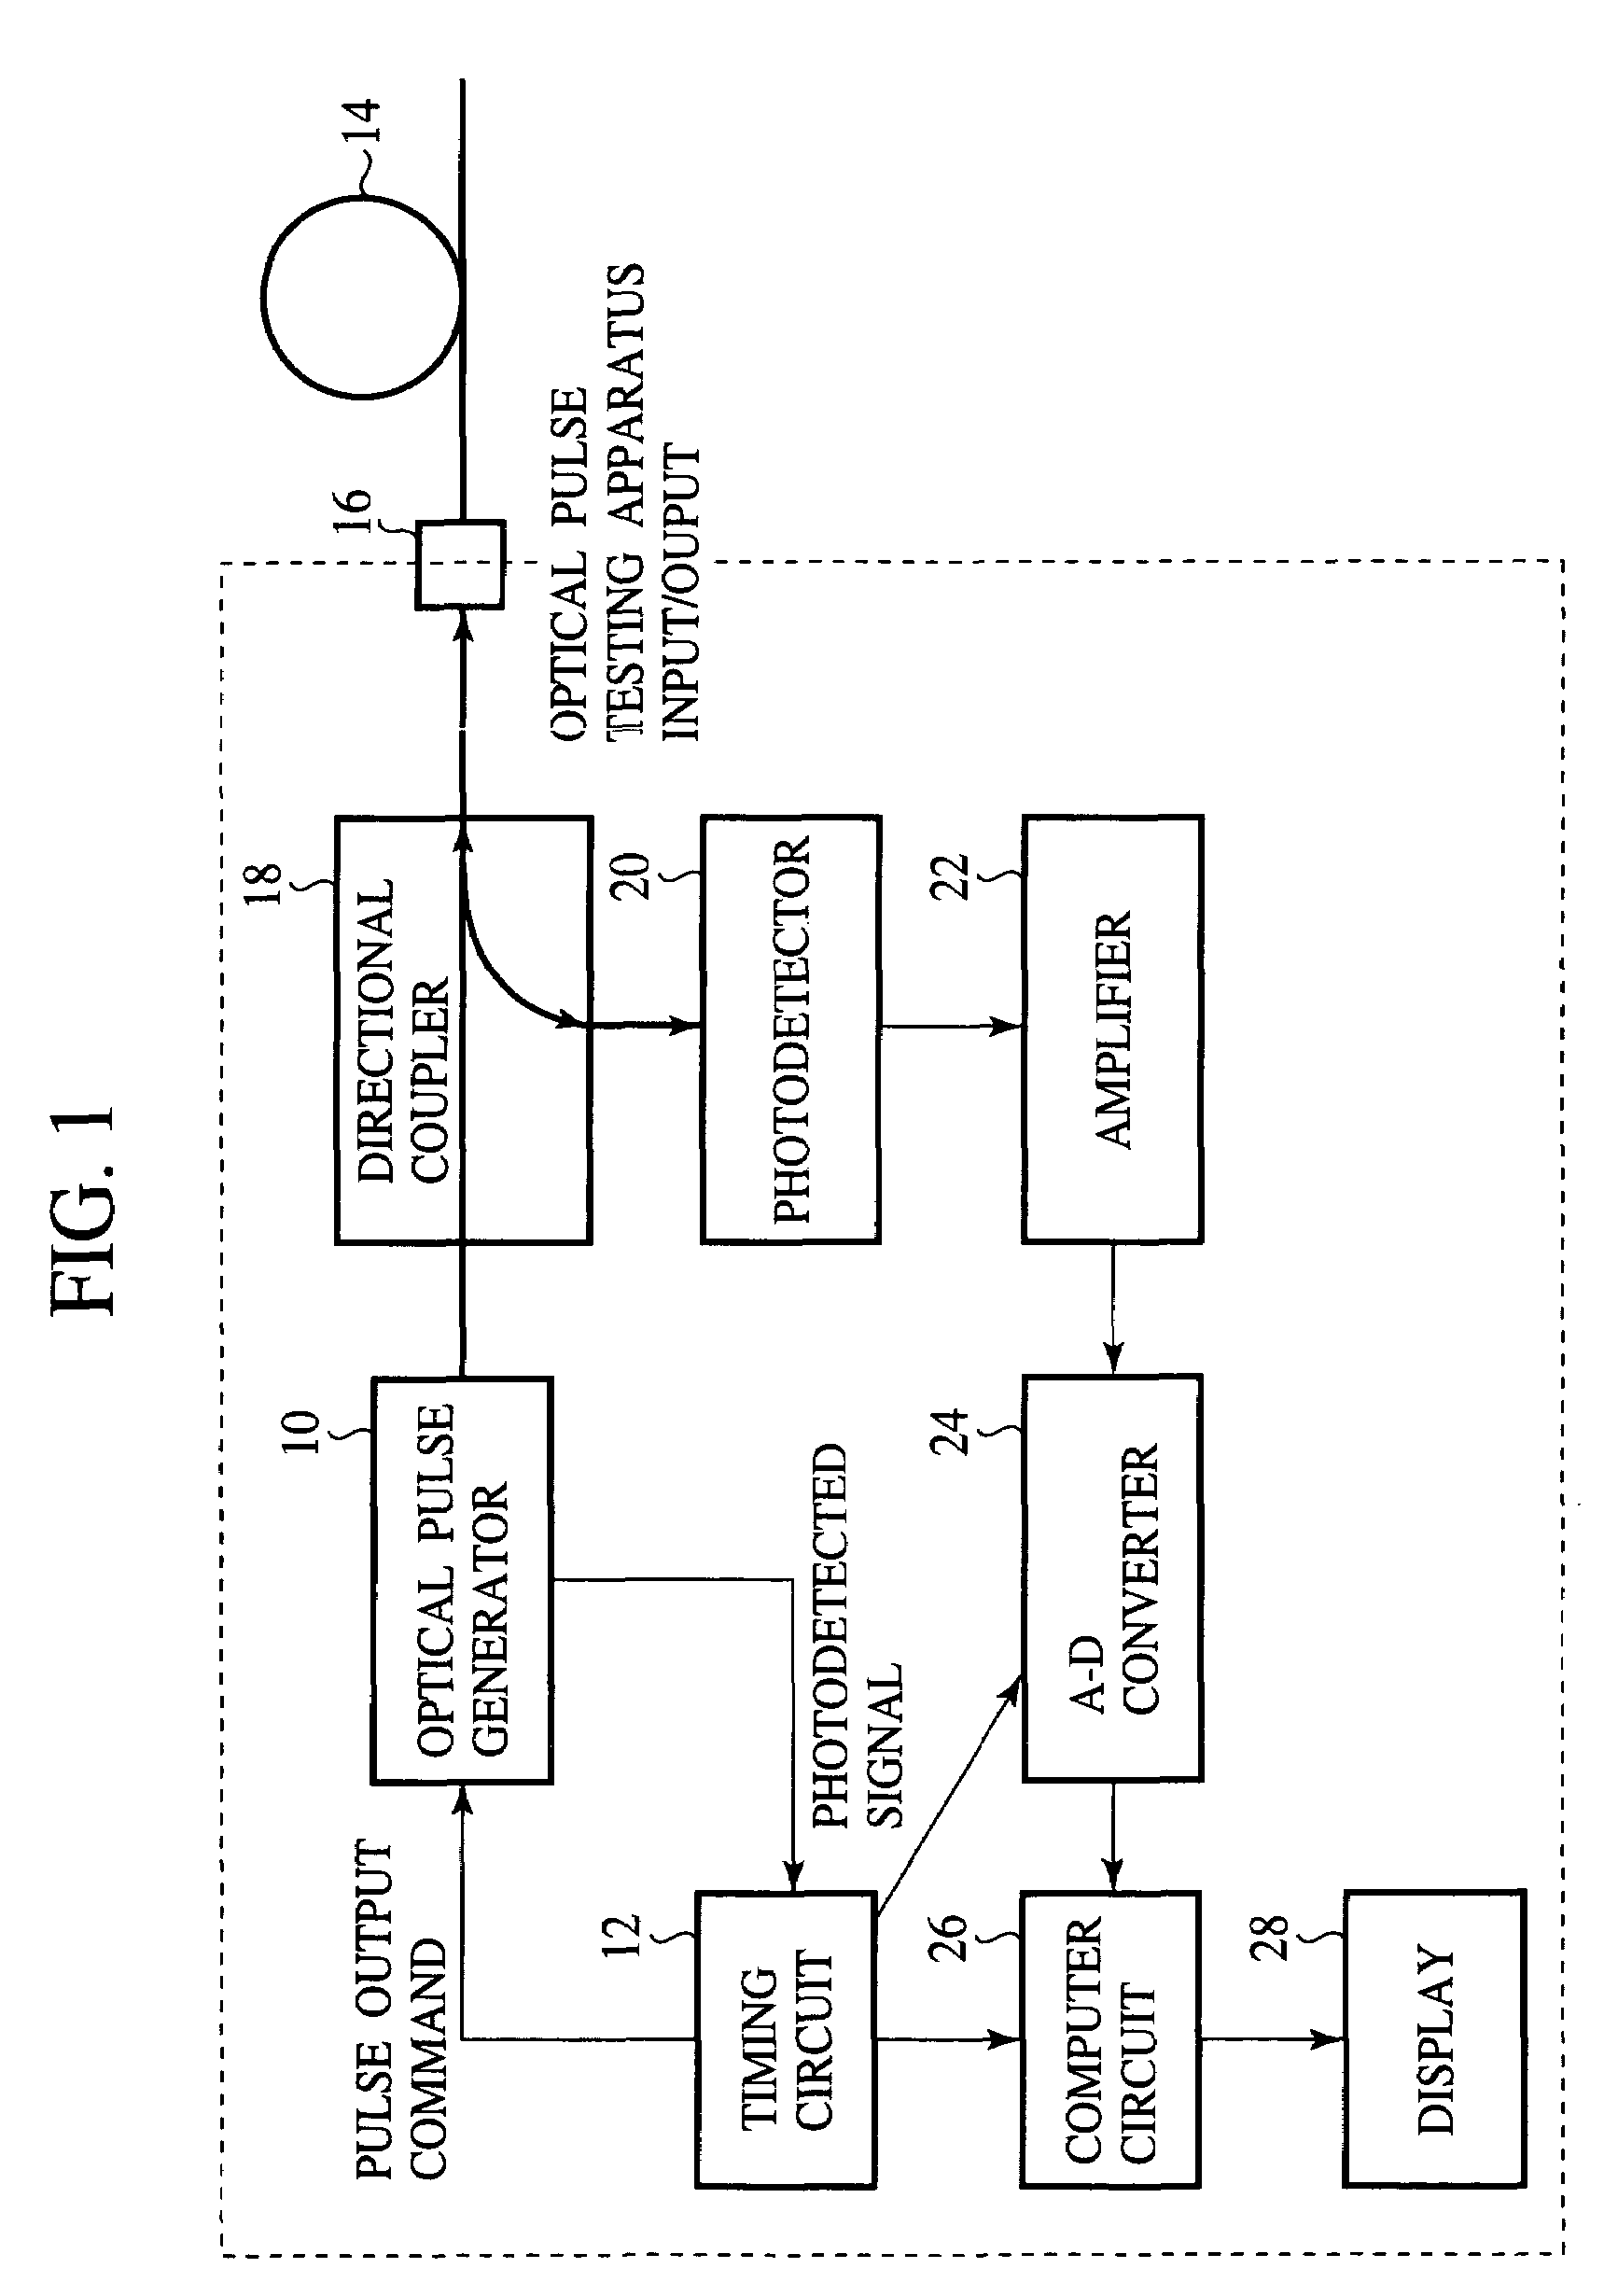 Optical pulse generator and optical pulse testing instrument and method